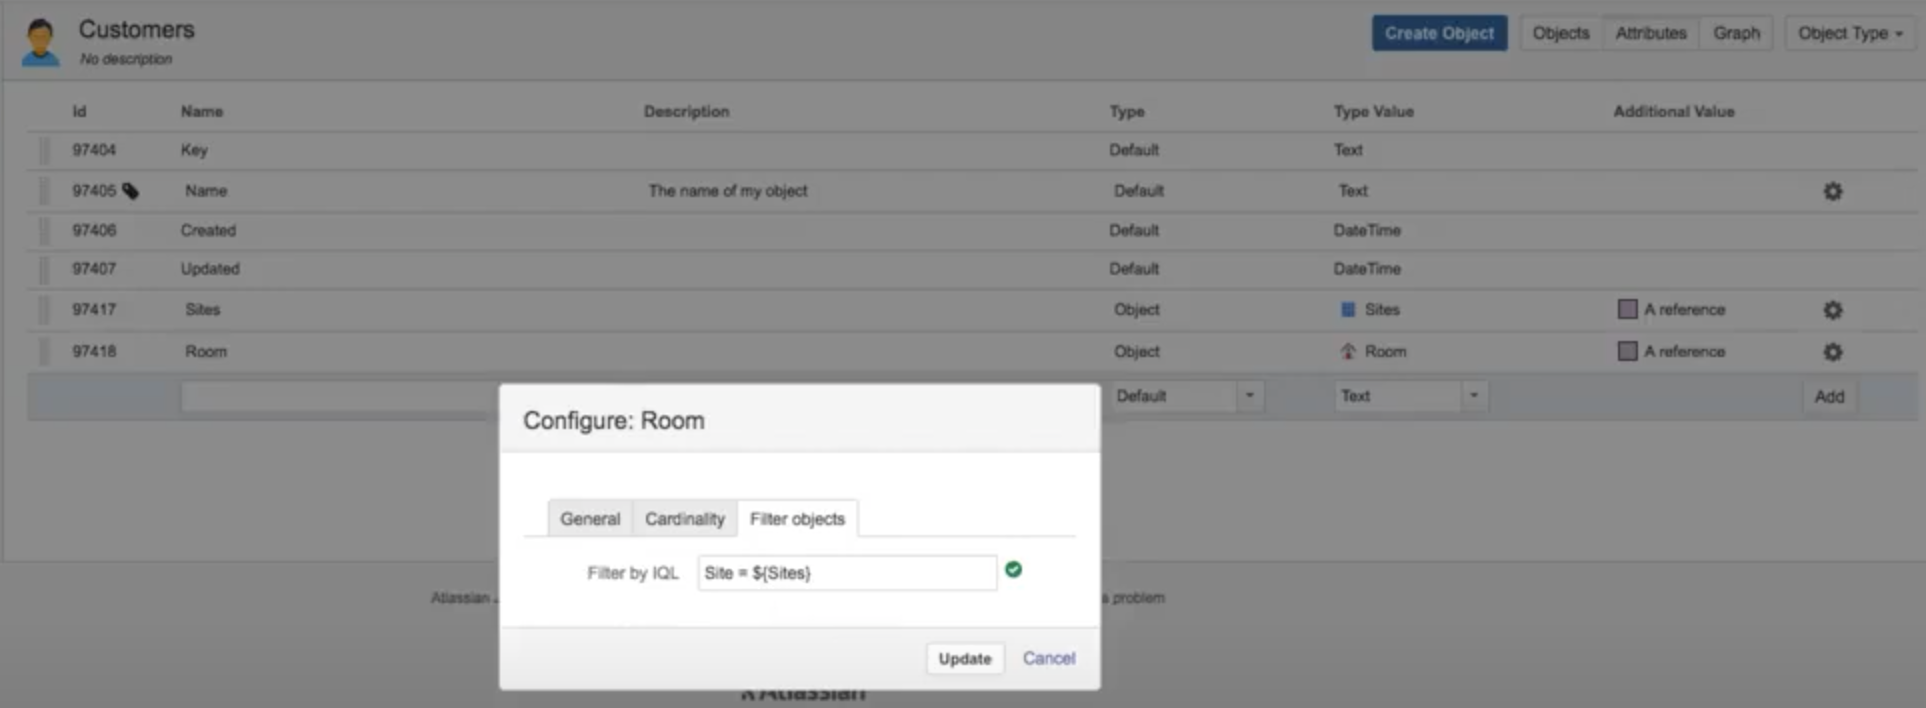 Filter by IQL set to reference sites in the configure room dialog